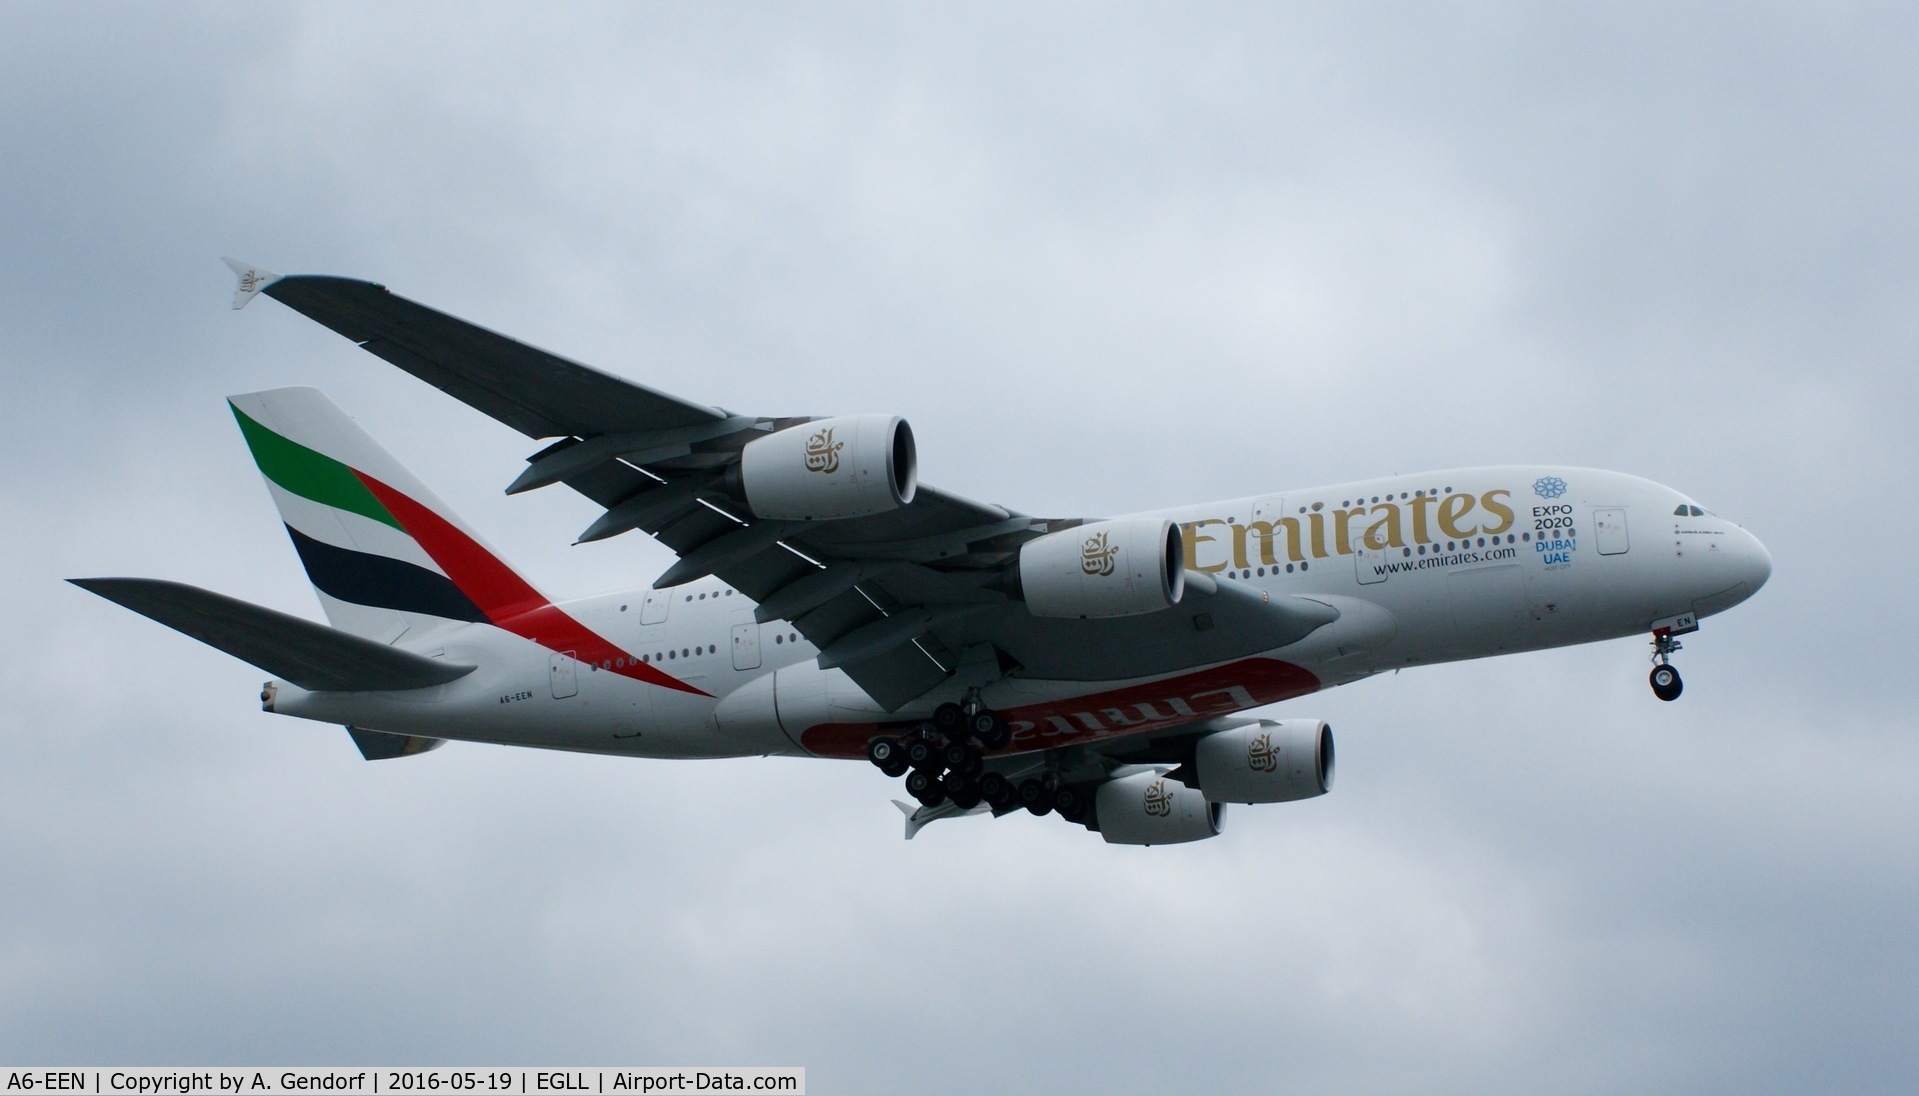 A6-EEN, 2013 Airbus A380-861 C/N 135, Emirates, is here approaching RWY 27R at London Heathrow(EGLL)